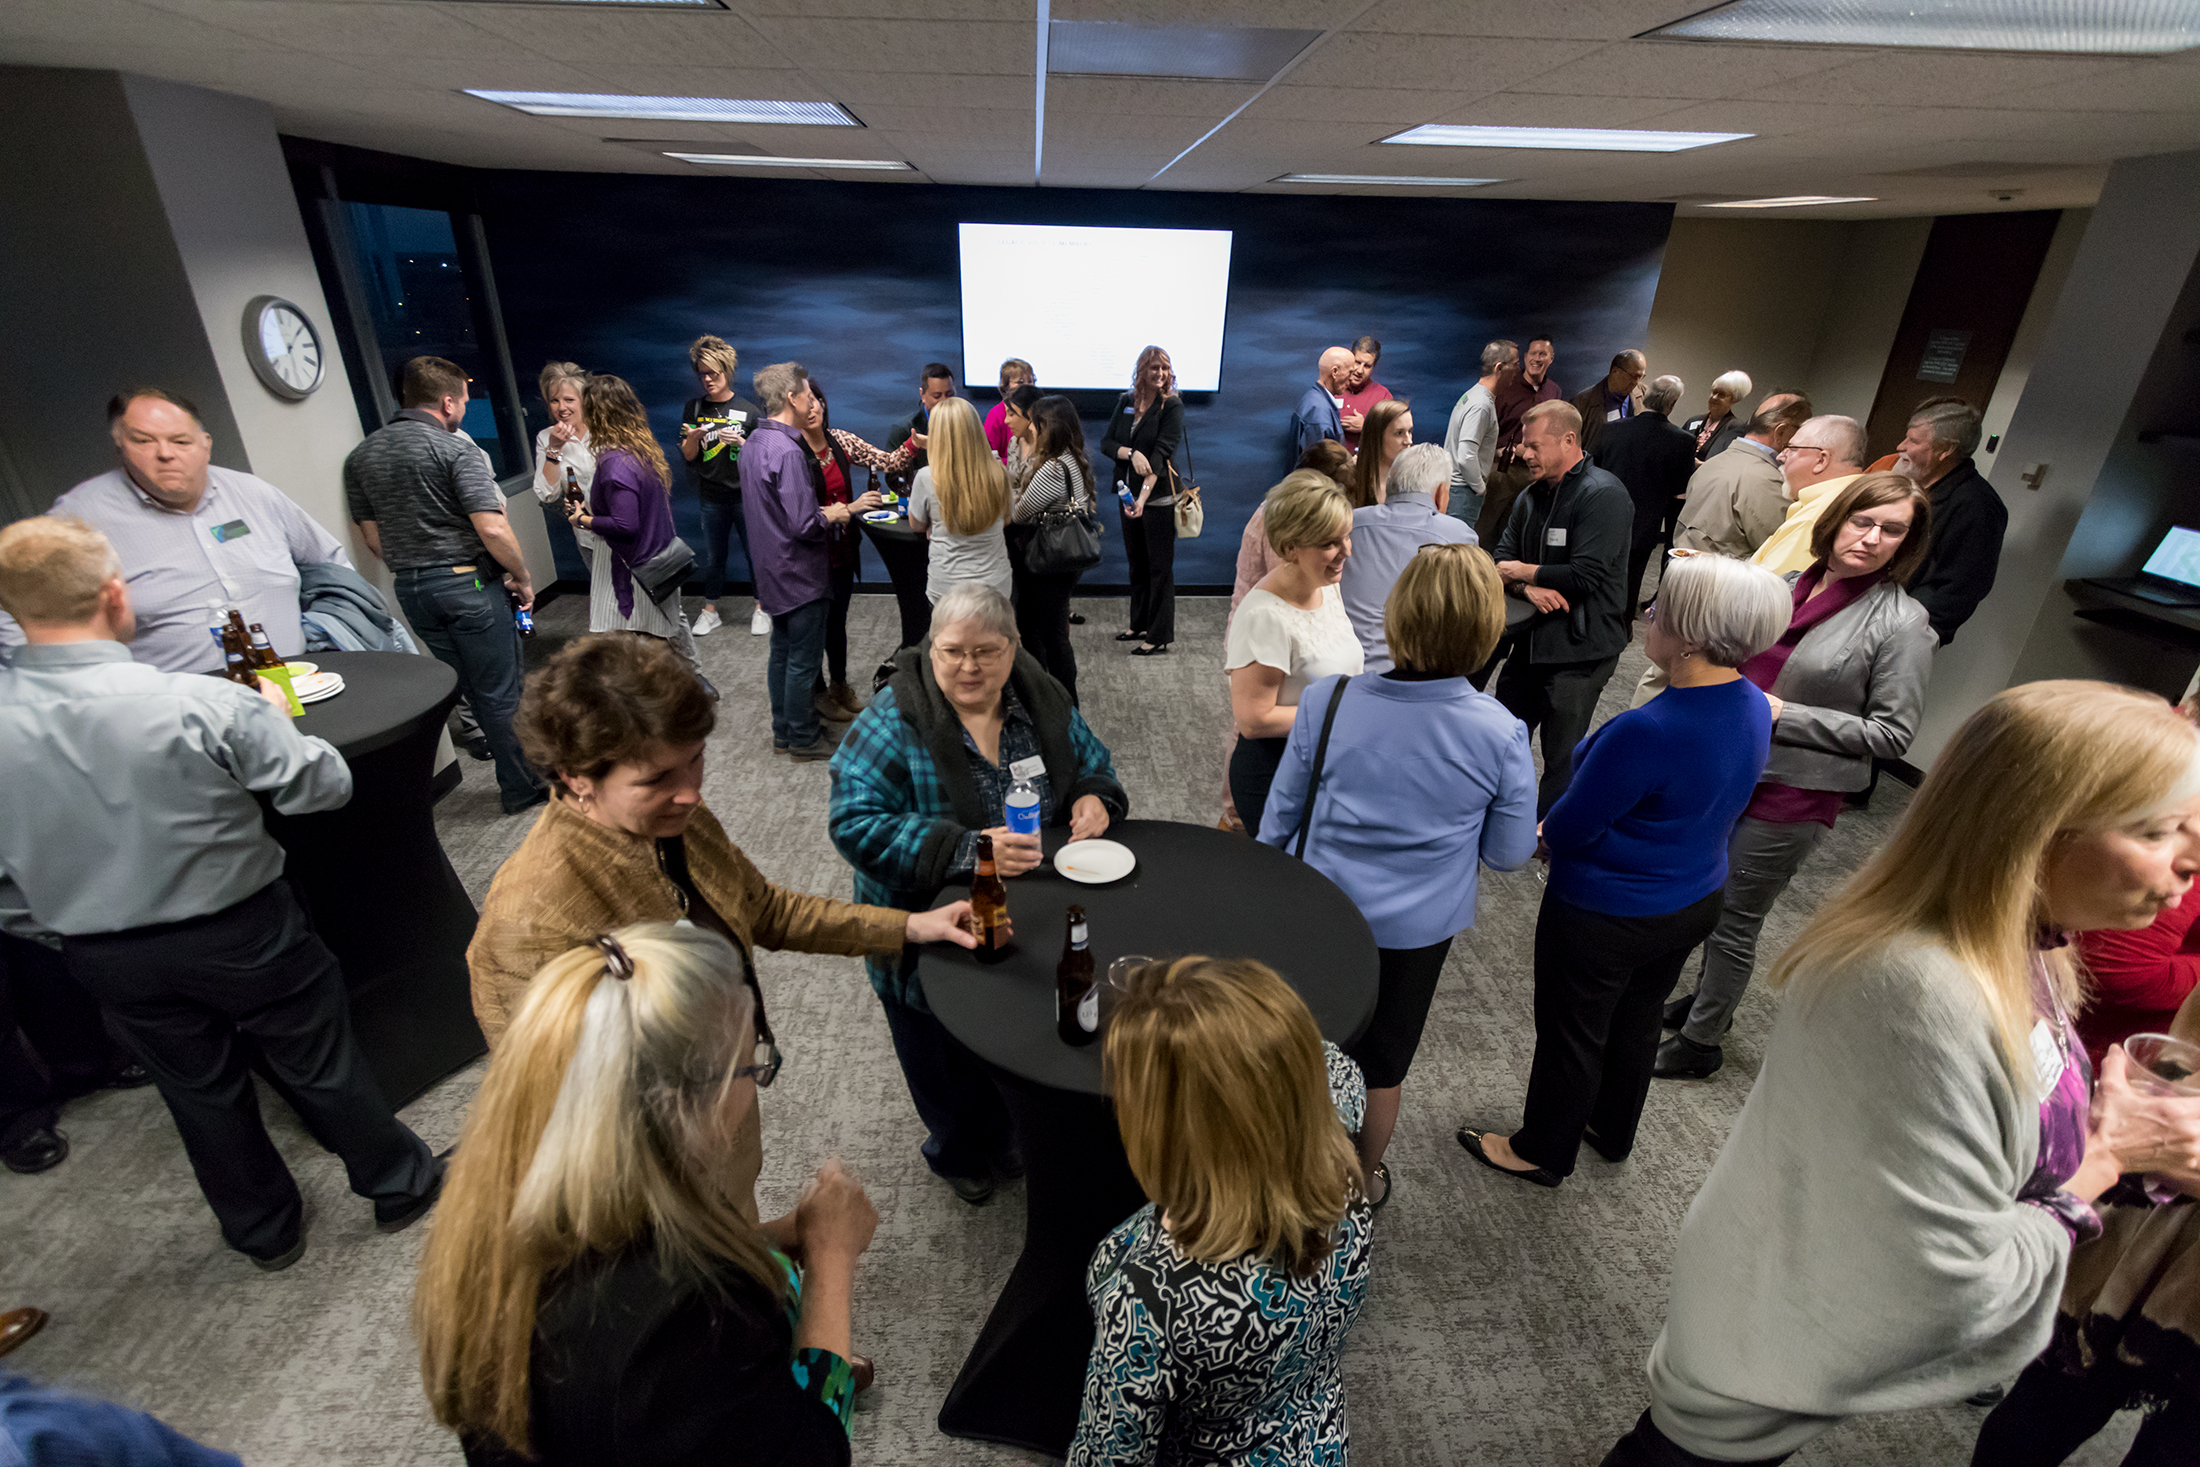 Main Photo for February Business After Hours at Hutchinson Community Foundation - 2